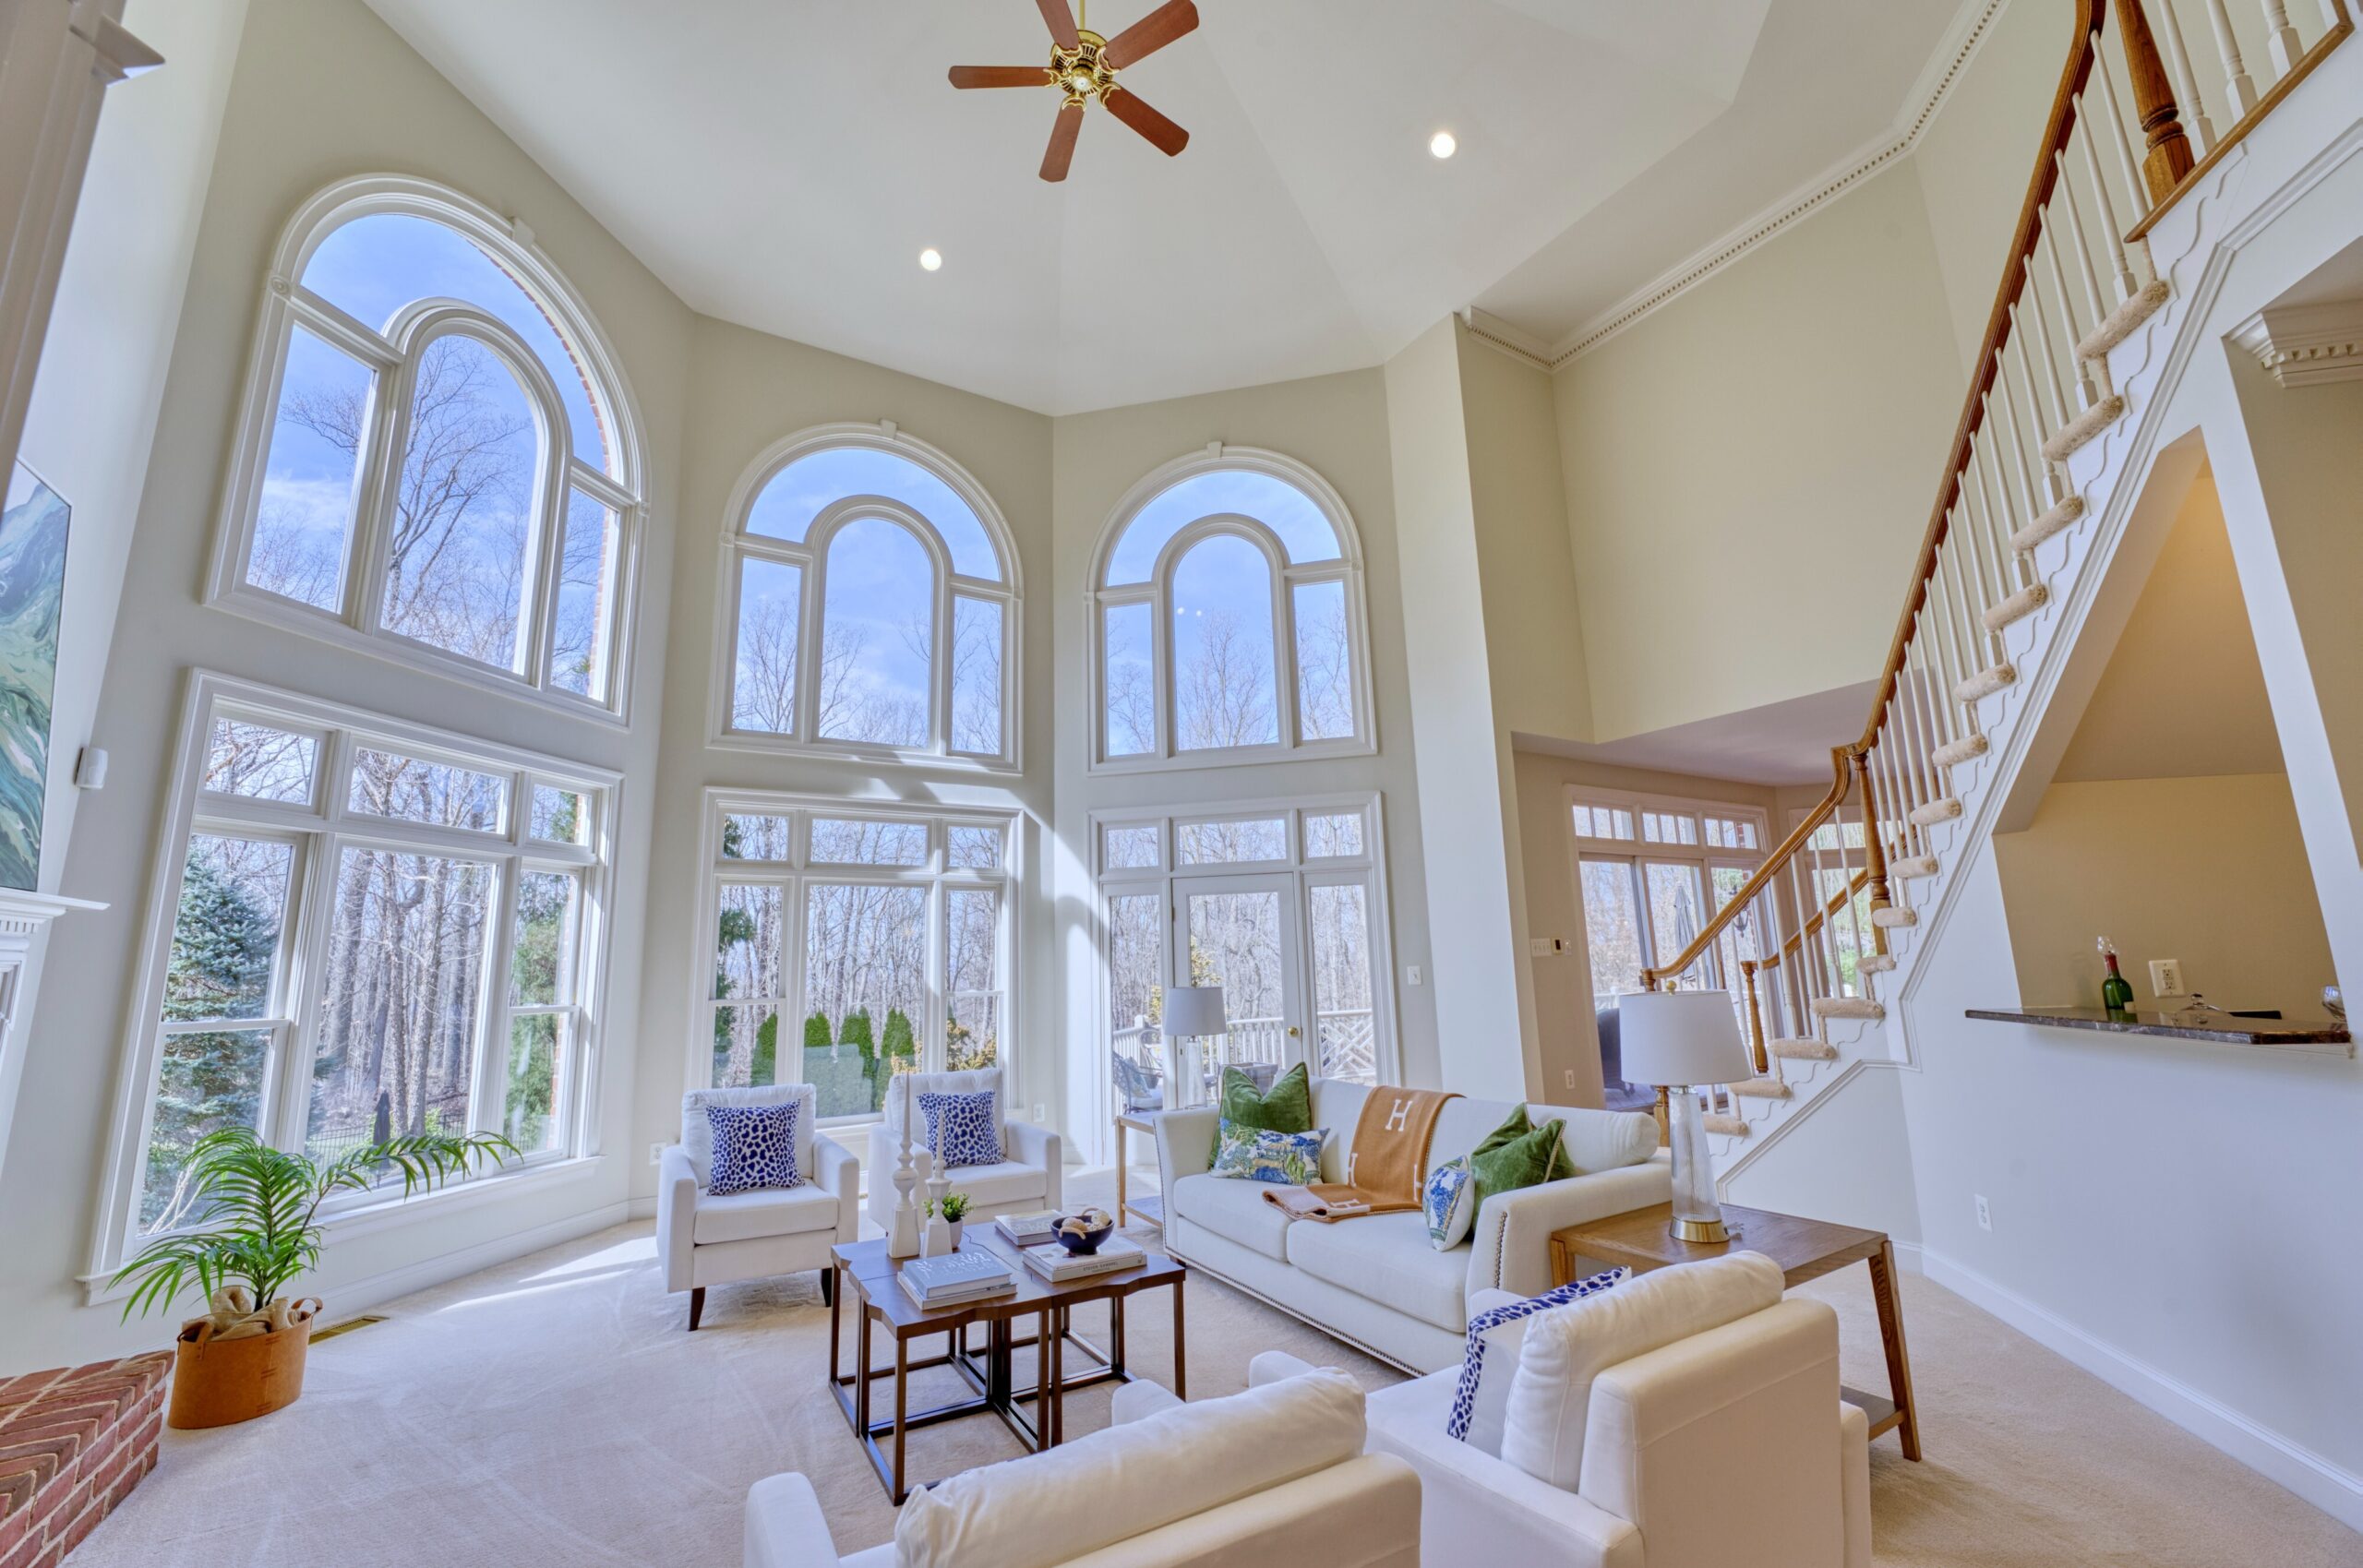 Professional interior photo of 17087 Bold Venture Drive, Leesburg - showing the large 2-story living room with ceiling fan and staircase to the second floor